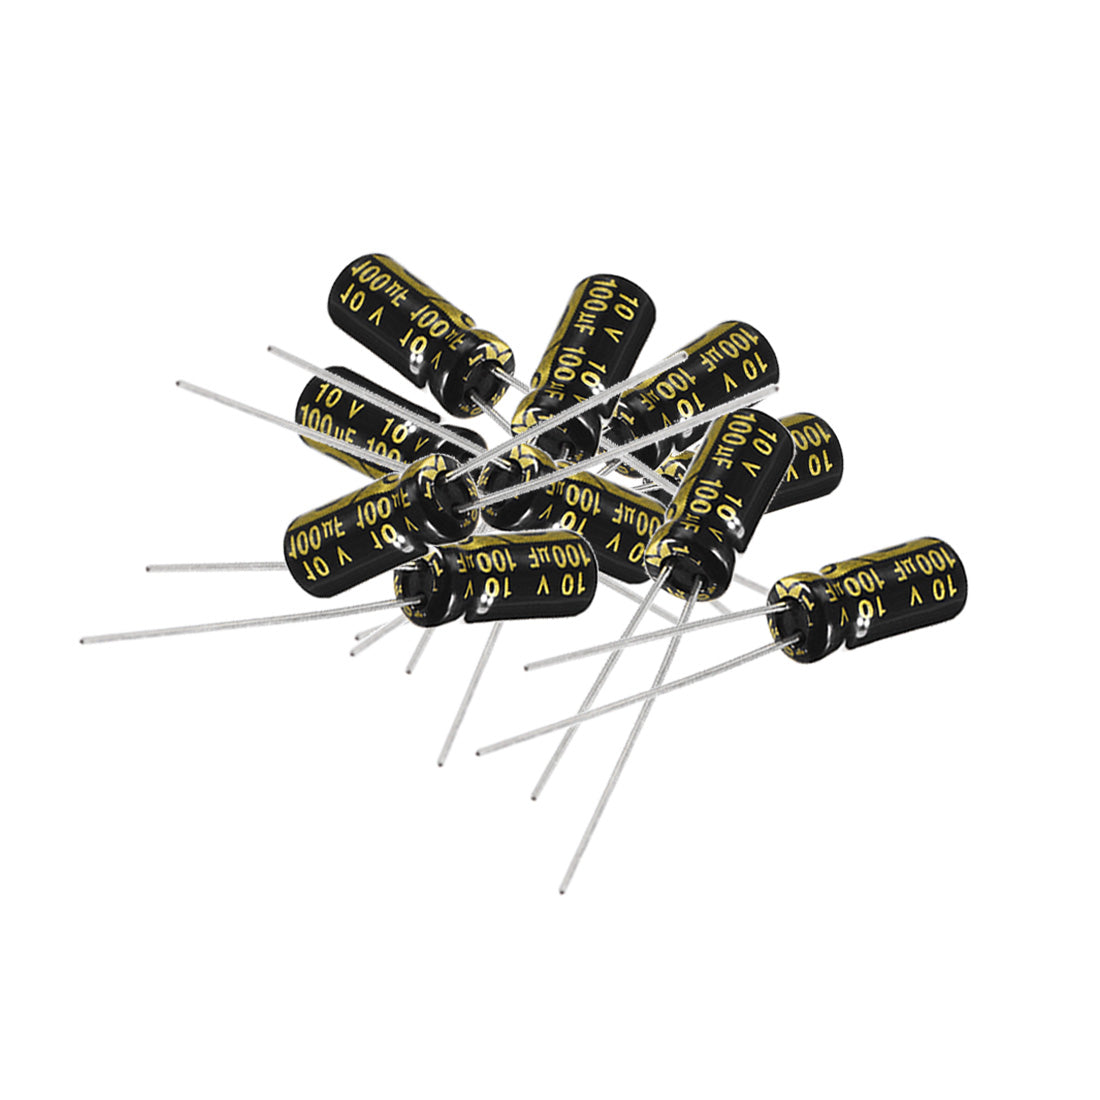 uxcell Uxcell Aluminum Radial Electrolytic Capacitor with 100uF 10V 105 Celsius Life 2000H 5 x 11 mm Black 10pcs